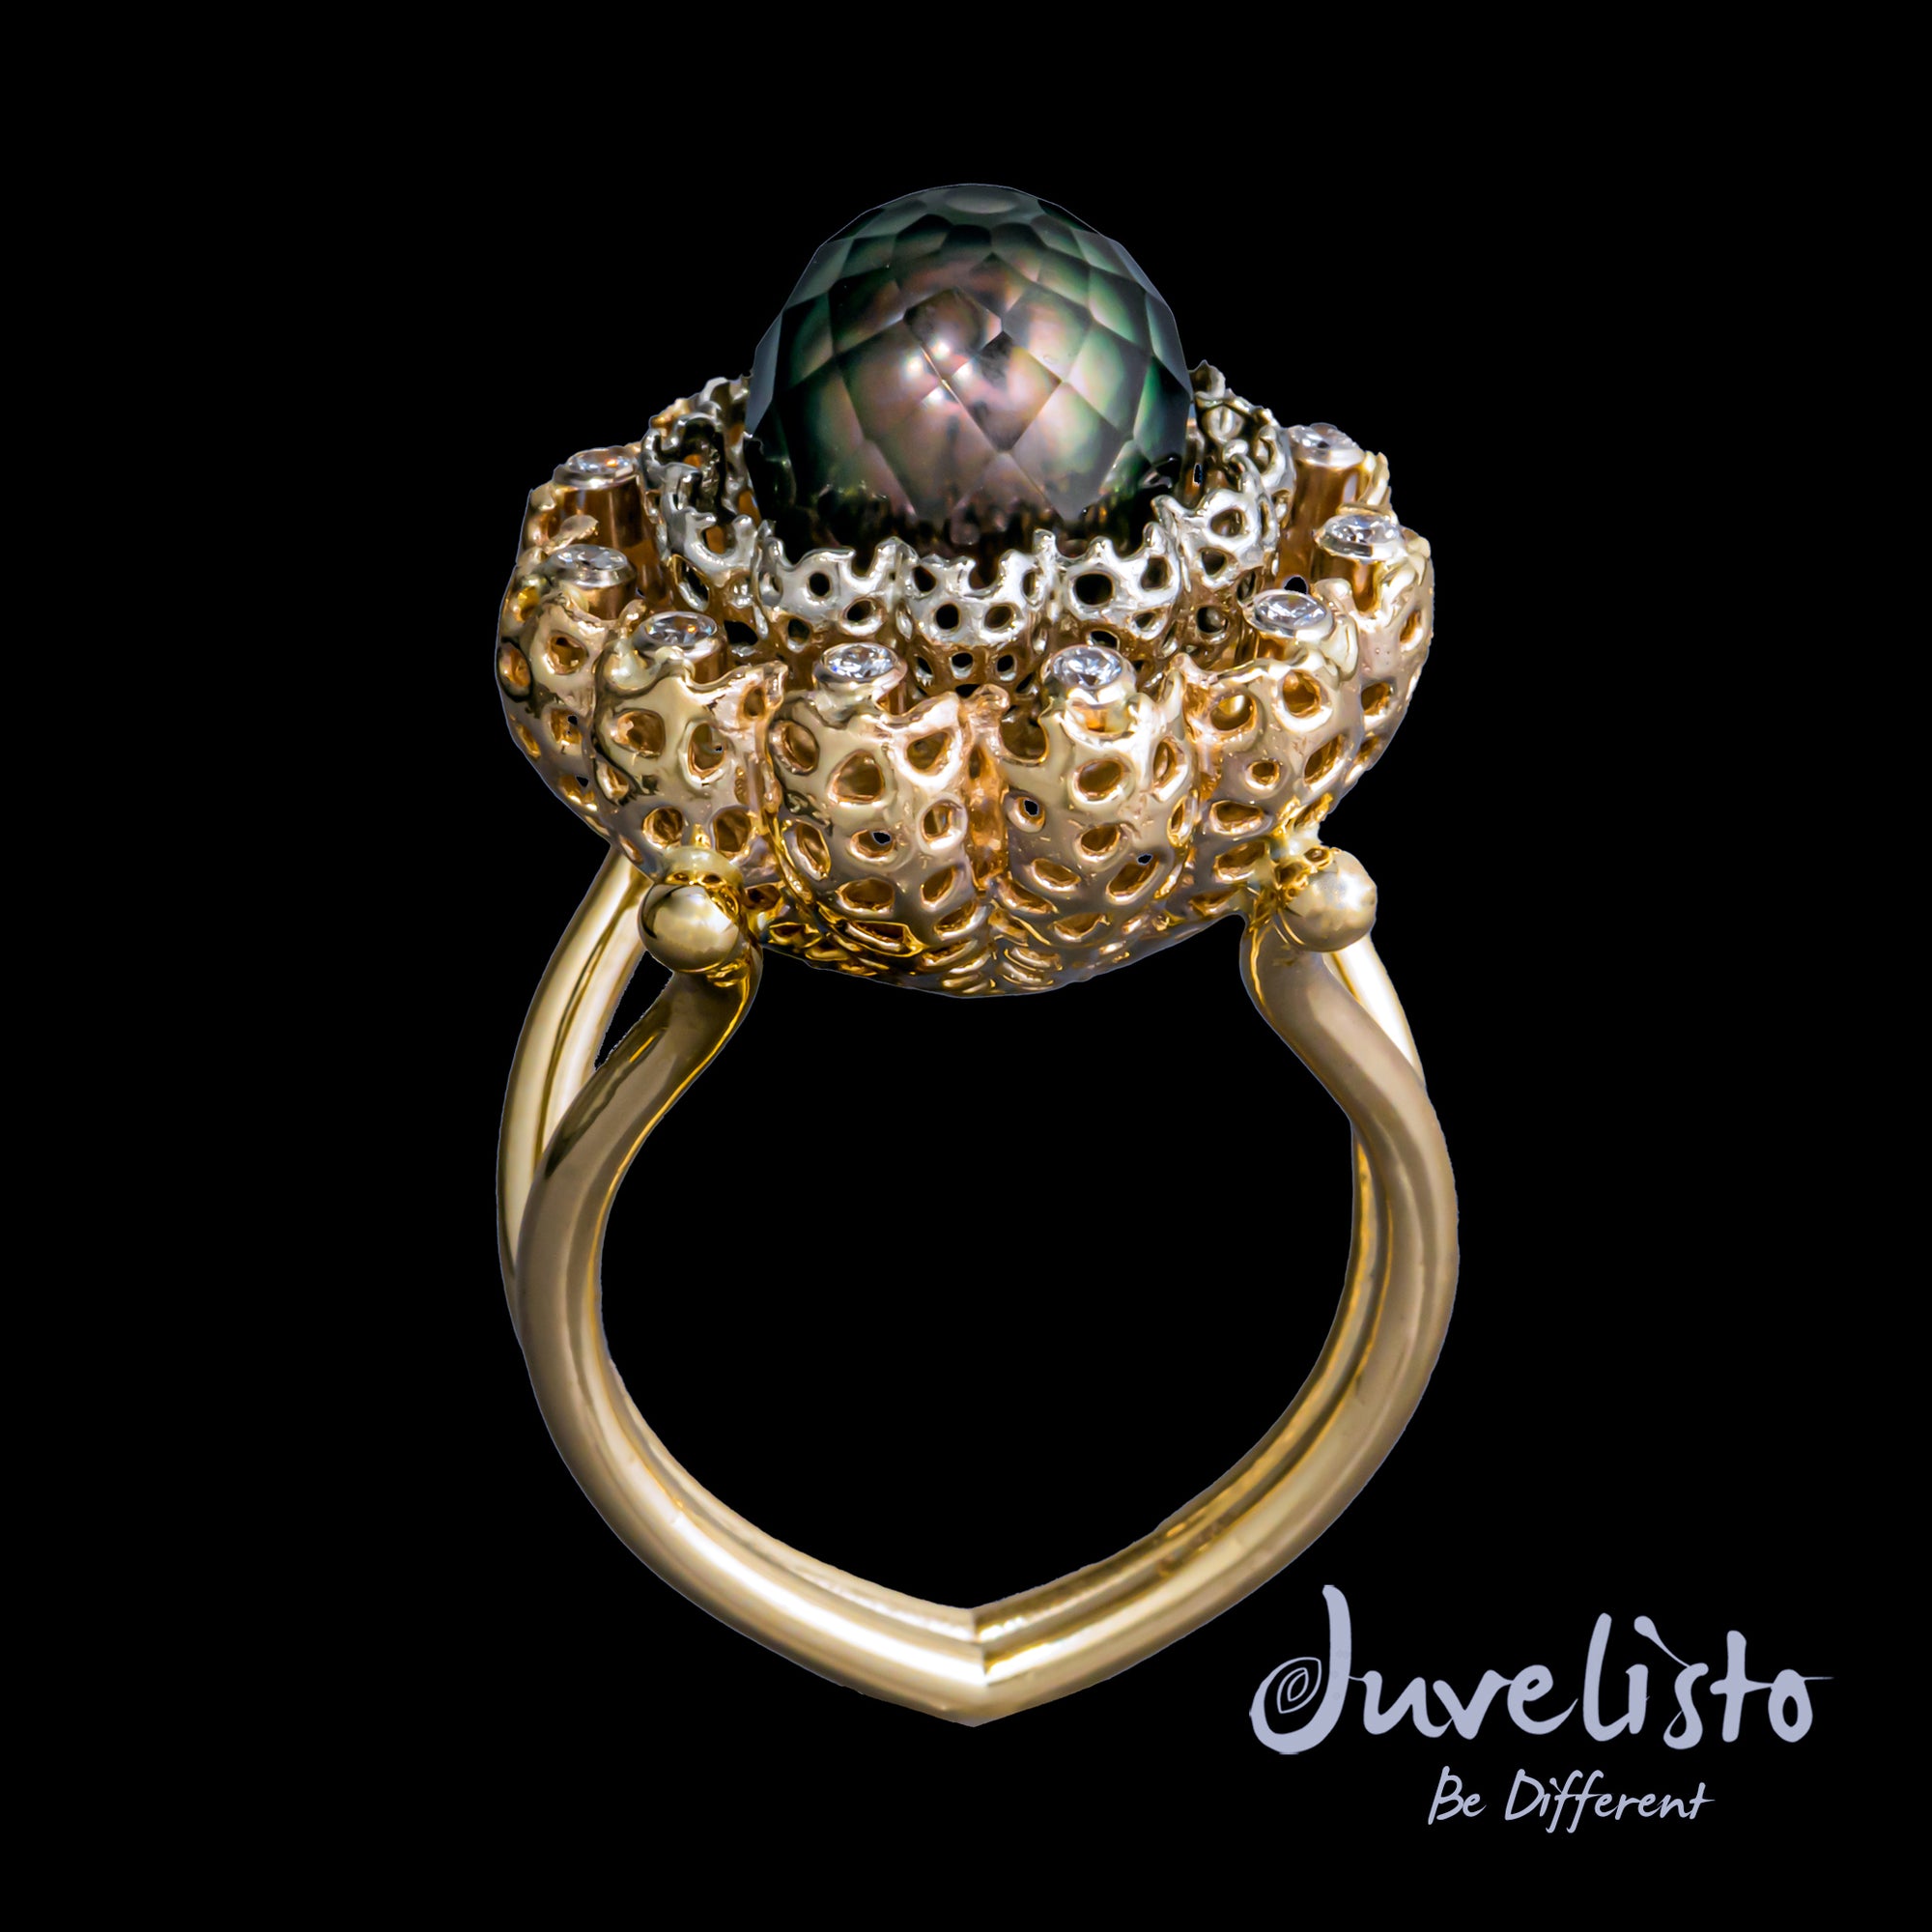 Juvelisto Design  The Sea Anemone Gold Ring with Tahitian Pearl And Diamonds